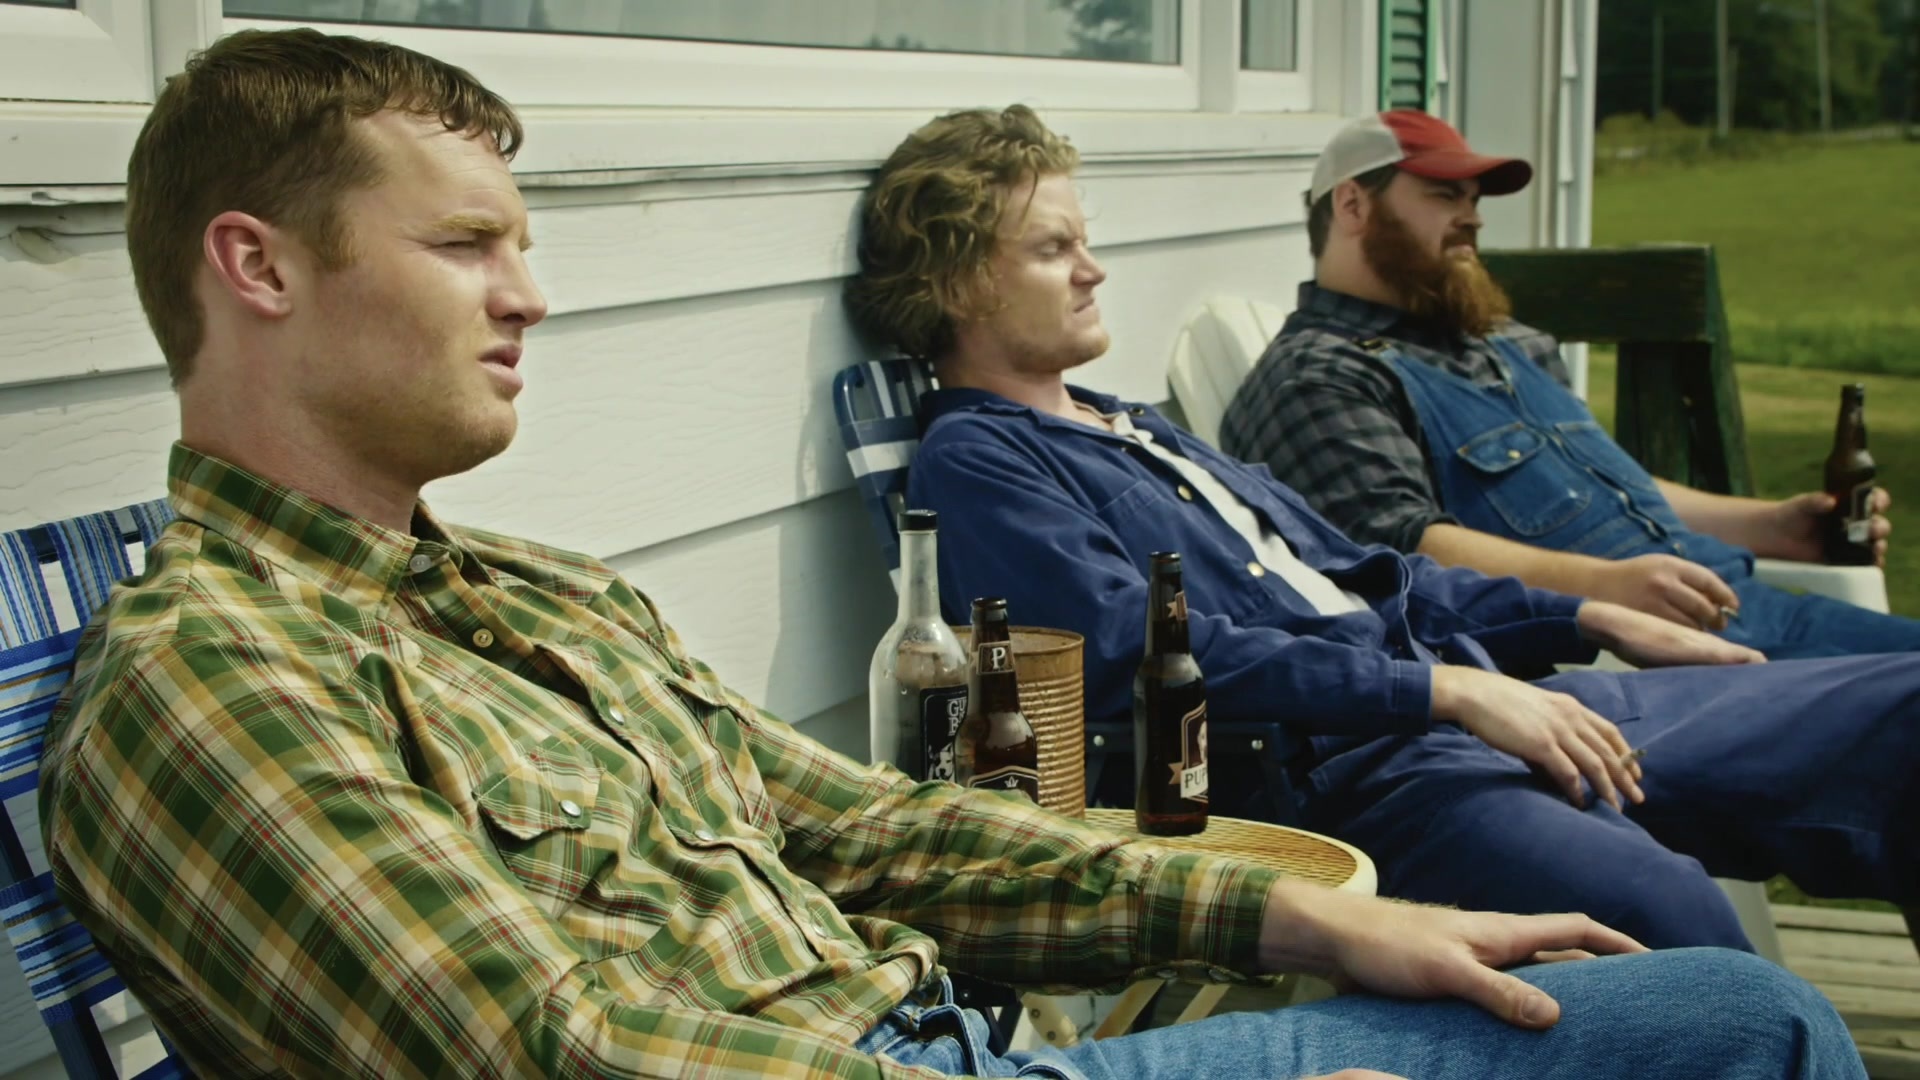 Letterkenny TV series, Memorable moments, Quirky characters, Canadian humor, 1920x1080 Full HD Desktop